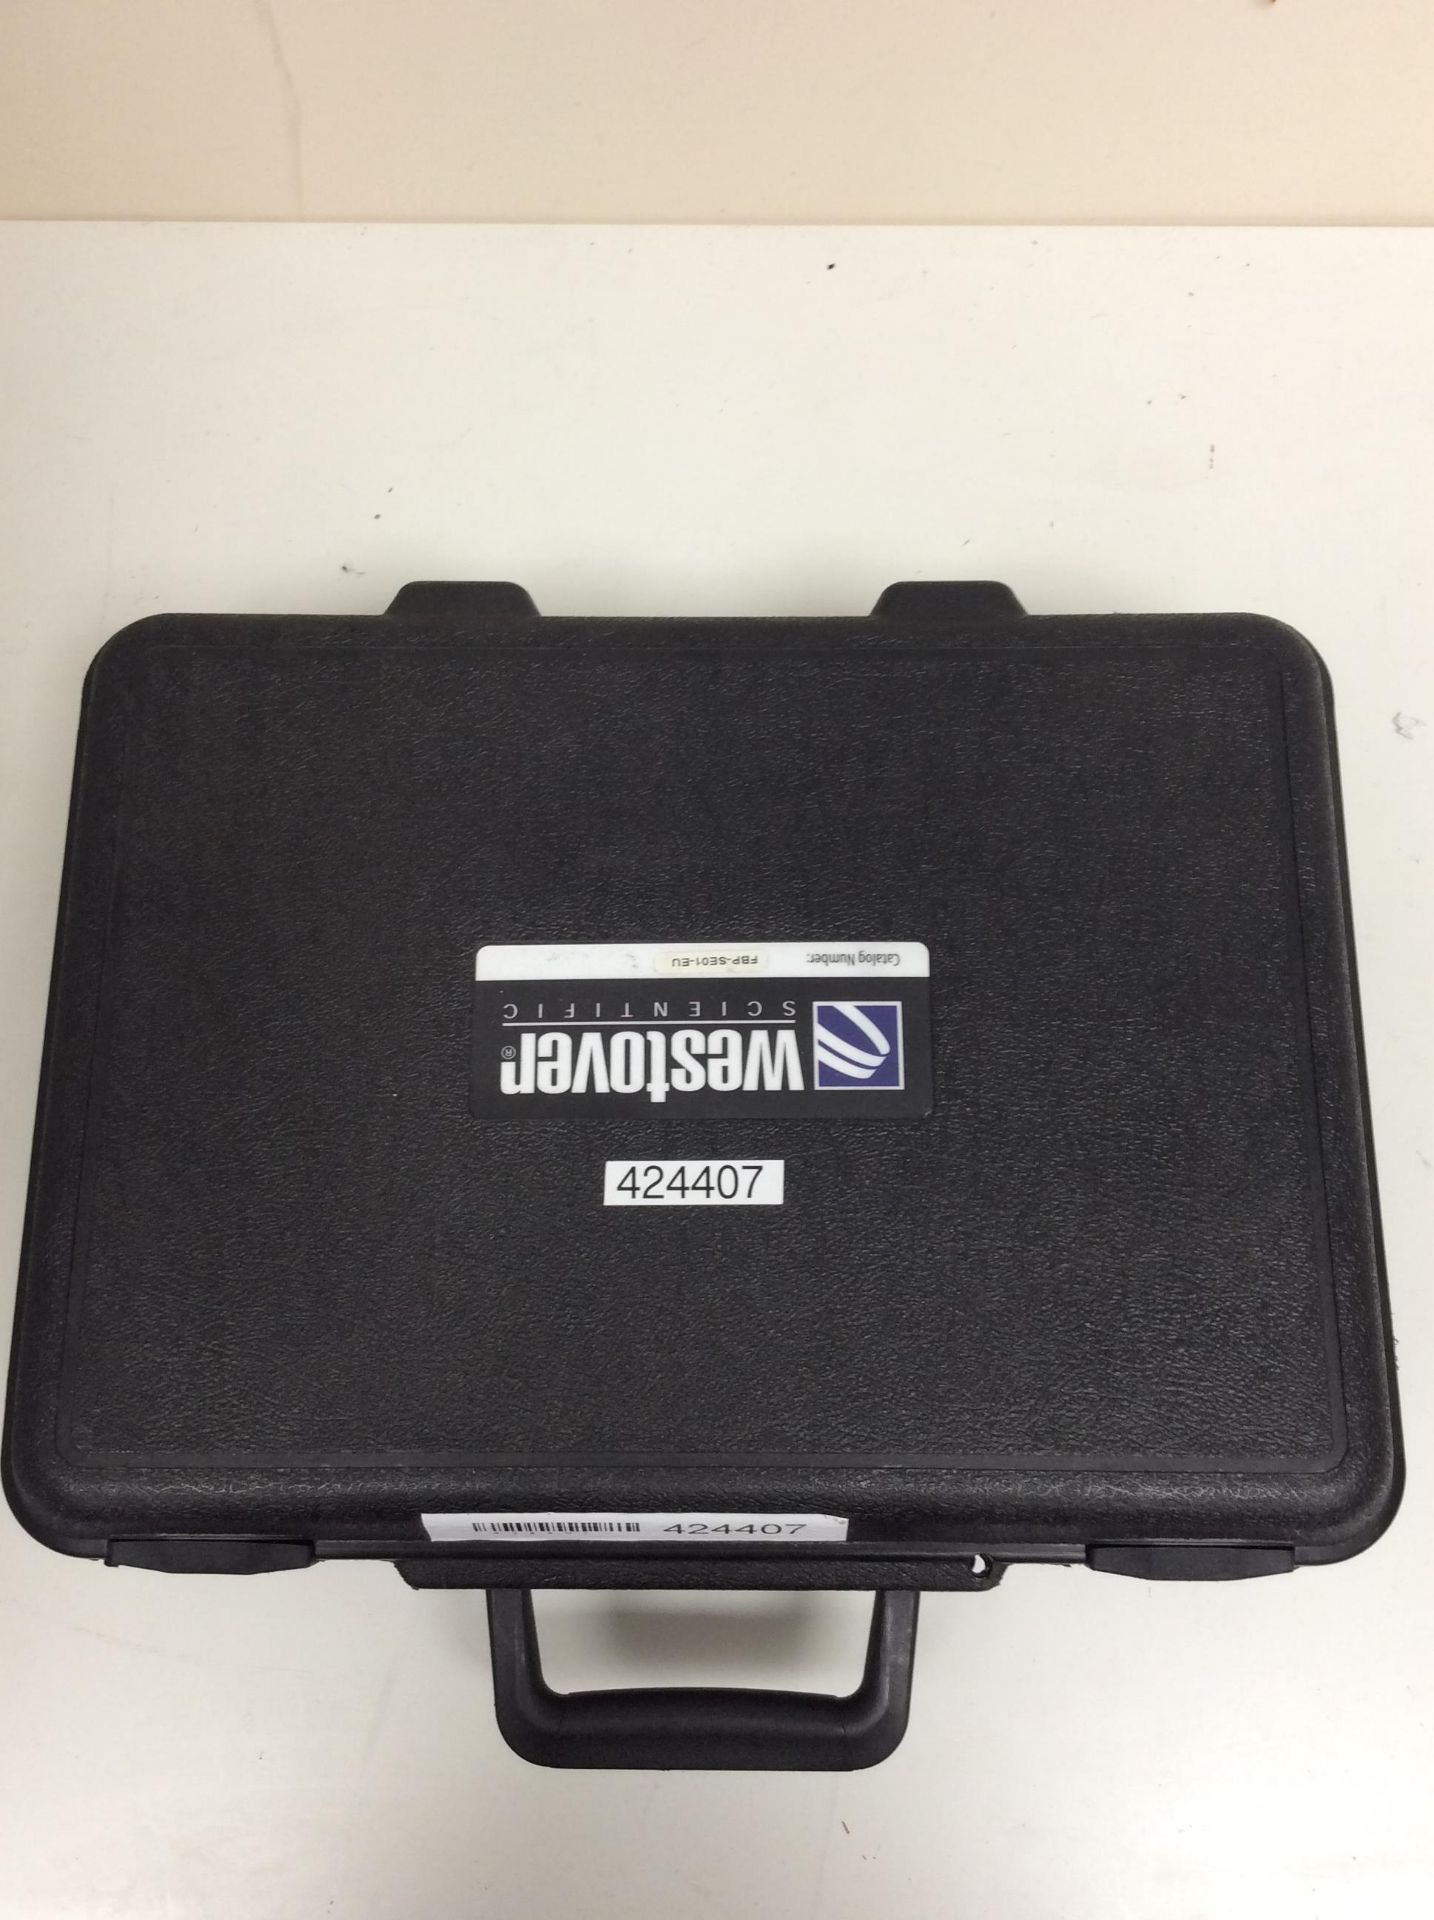 Westover zp-hde-9020 in carry case fbp probe microsc0pe and hd2 display - Image 2 of 2